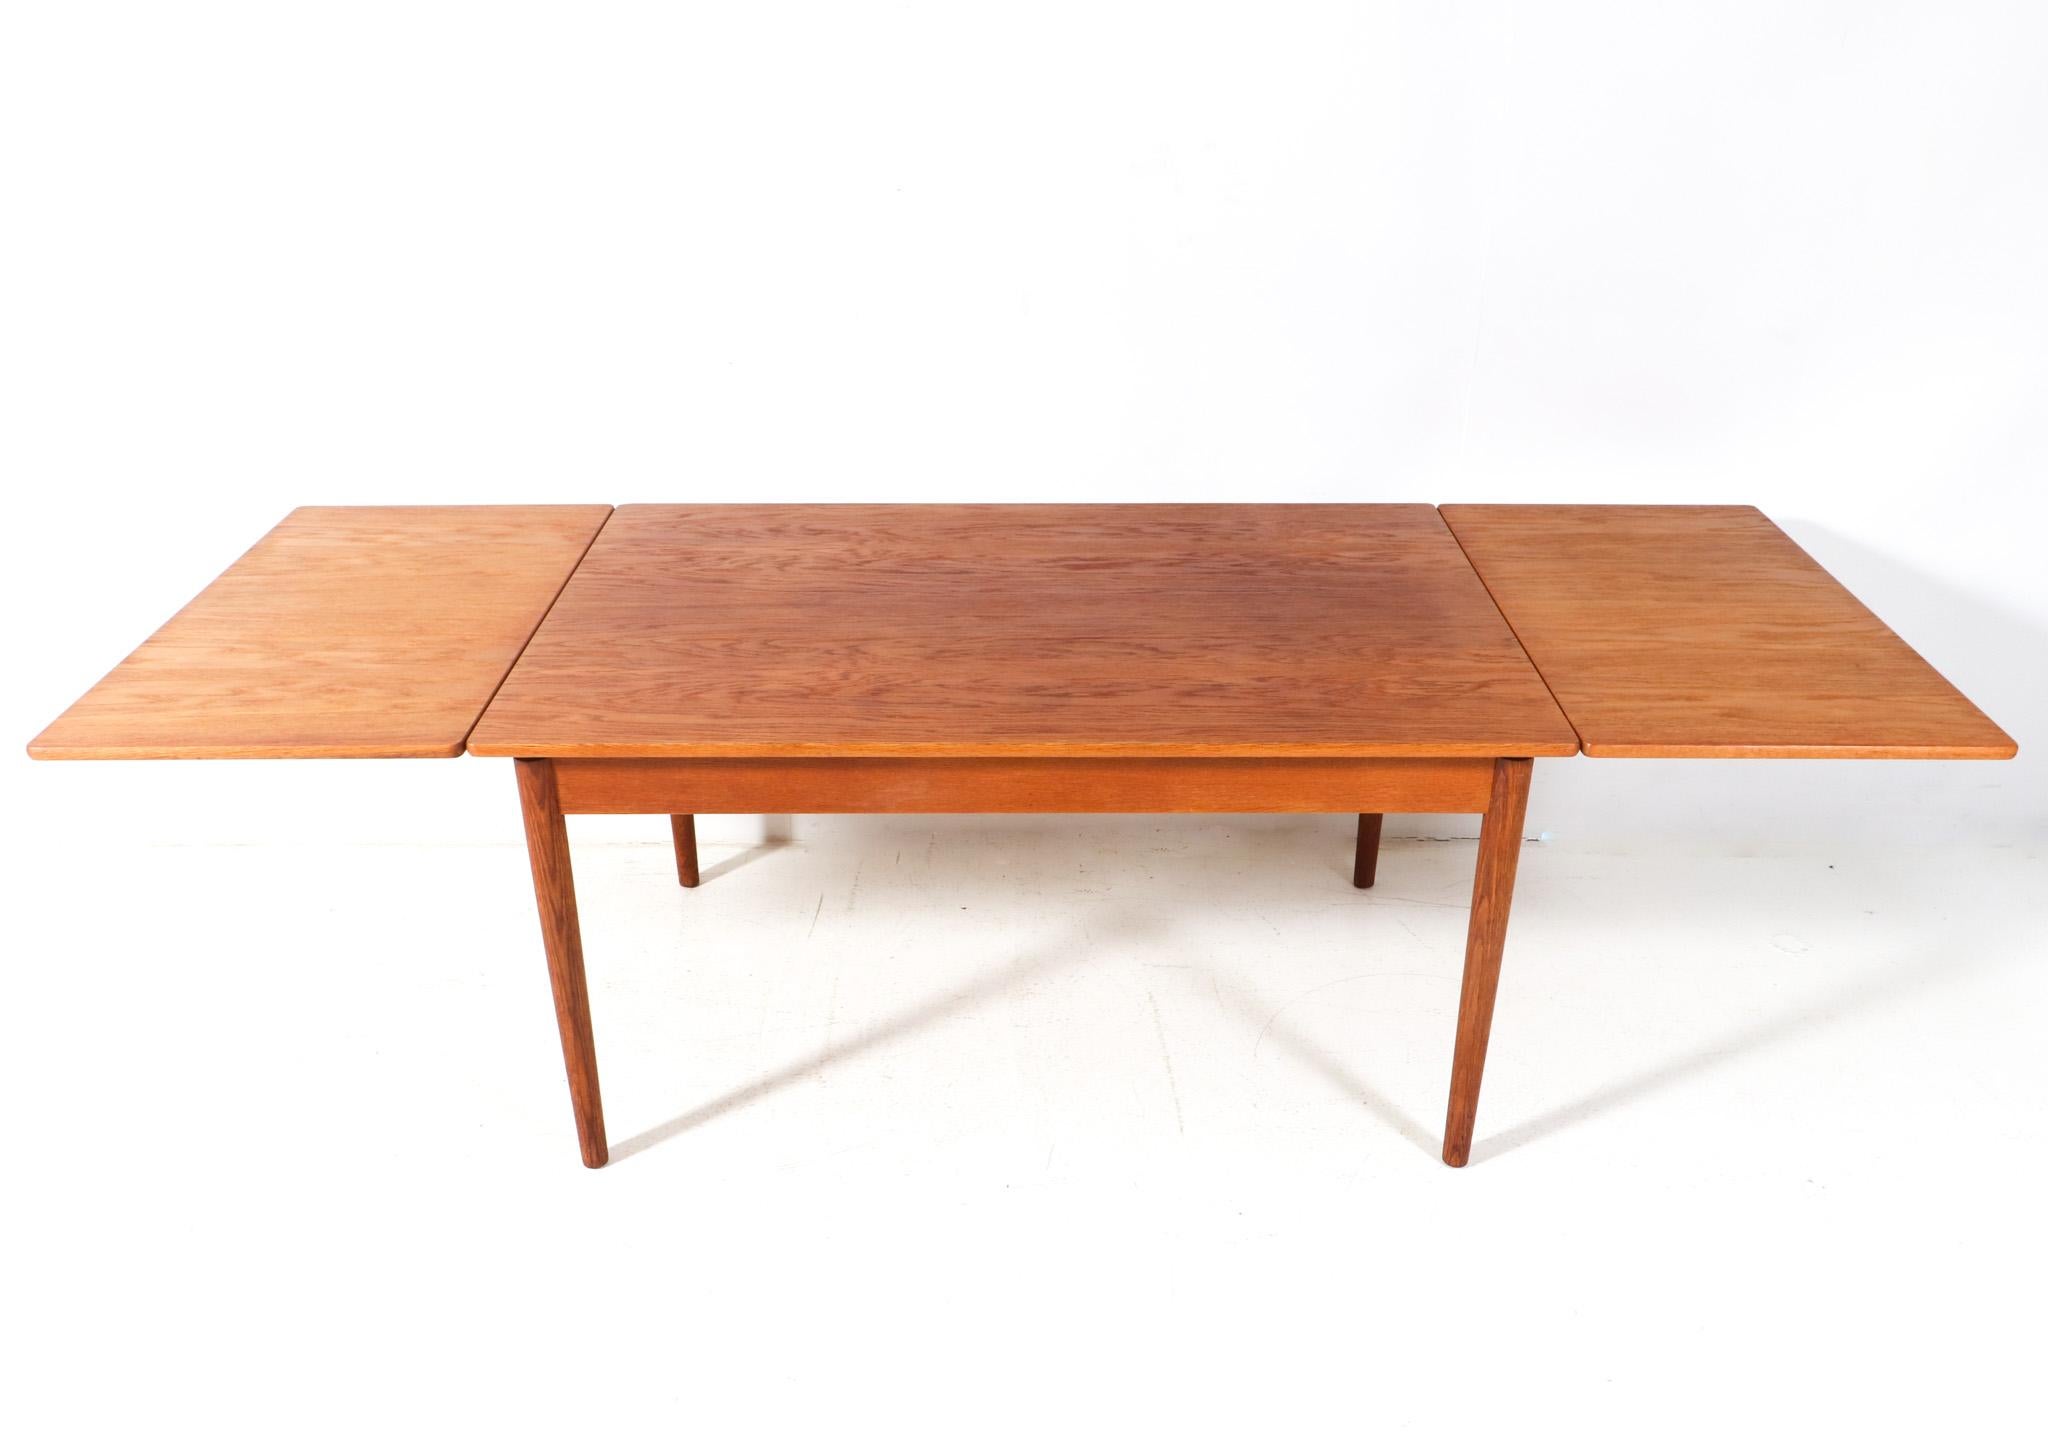  Mid-Century Modern Oak AT-316 Dining Table by Hans J. Wegner for Andreas Tuck For Sale 2